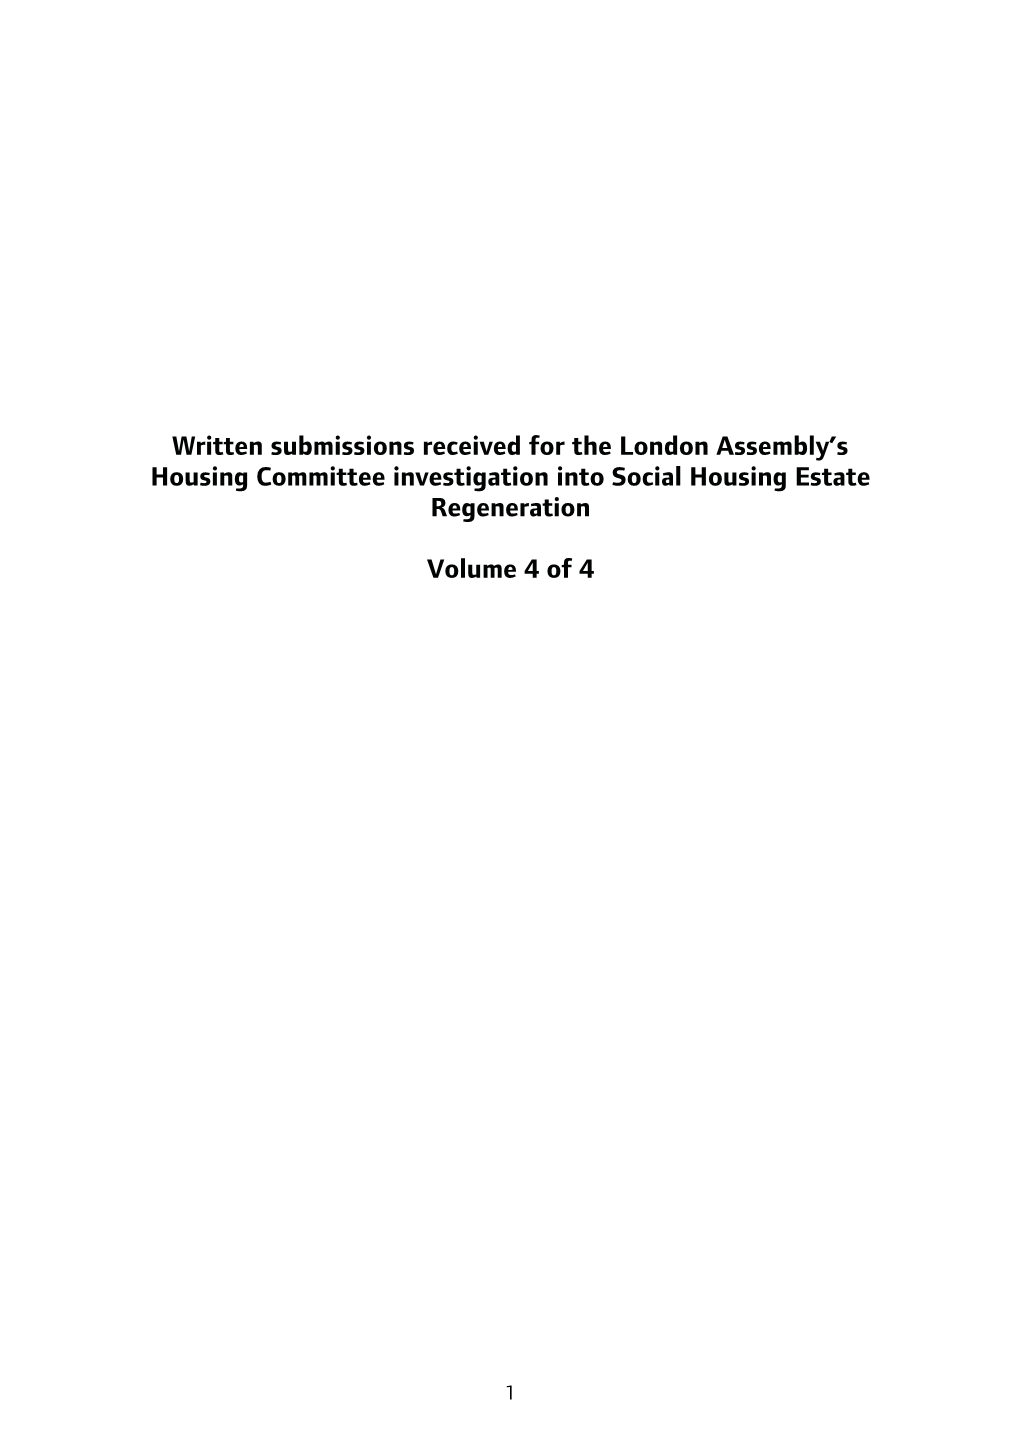 Written Submissions Received for the London Assembly's Housing Committee Investigation Into Social Housing Estate Regeneration